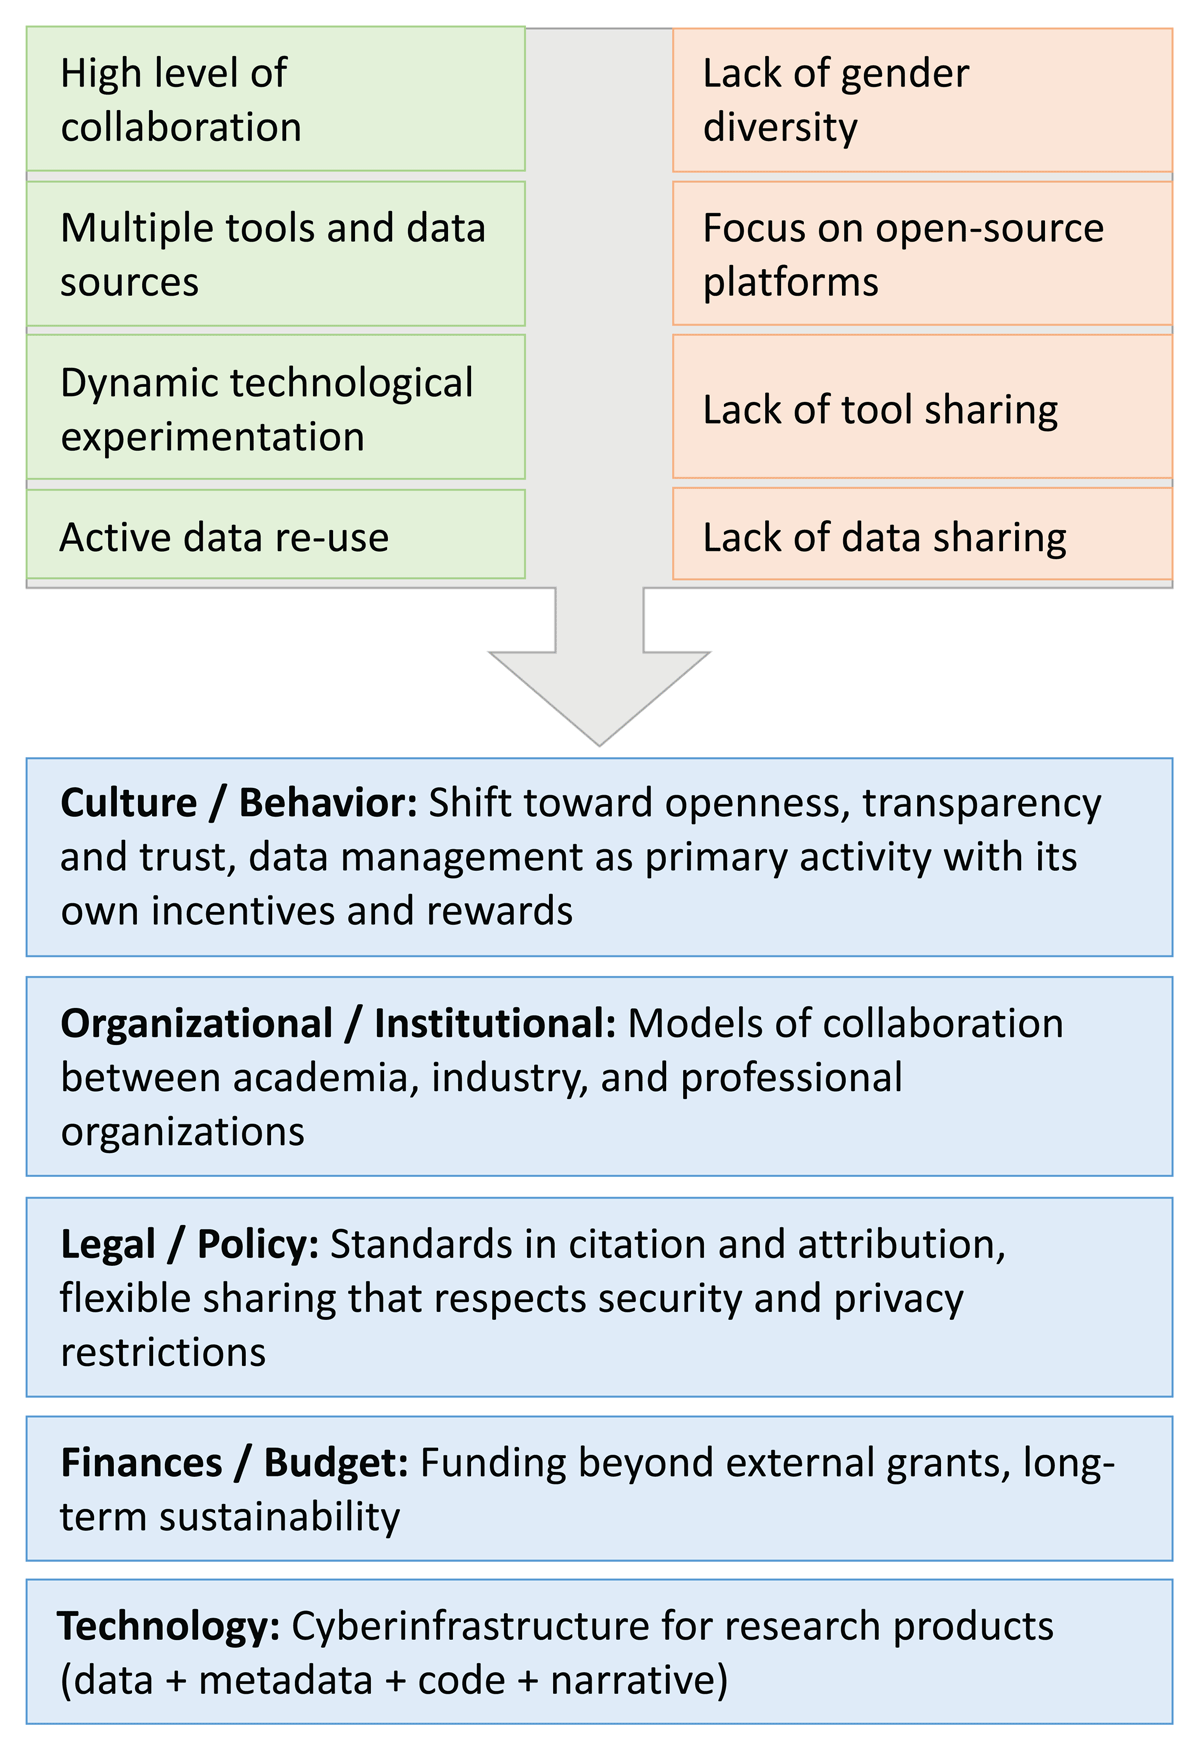 A diagram that synthesizes paper findings and ties them to broader factors that affect data sharing and use